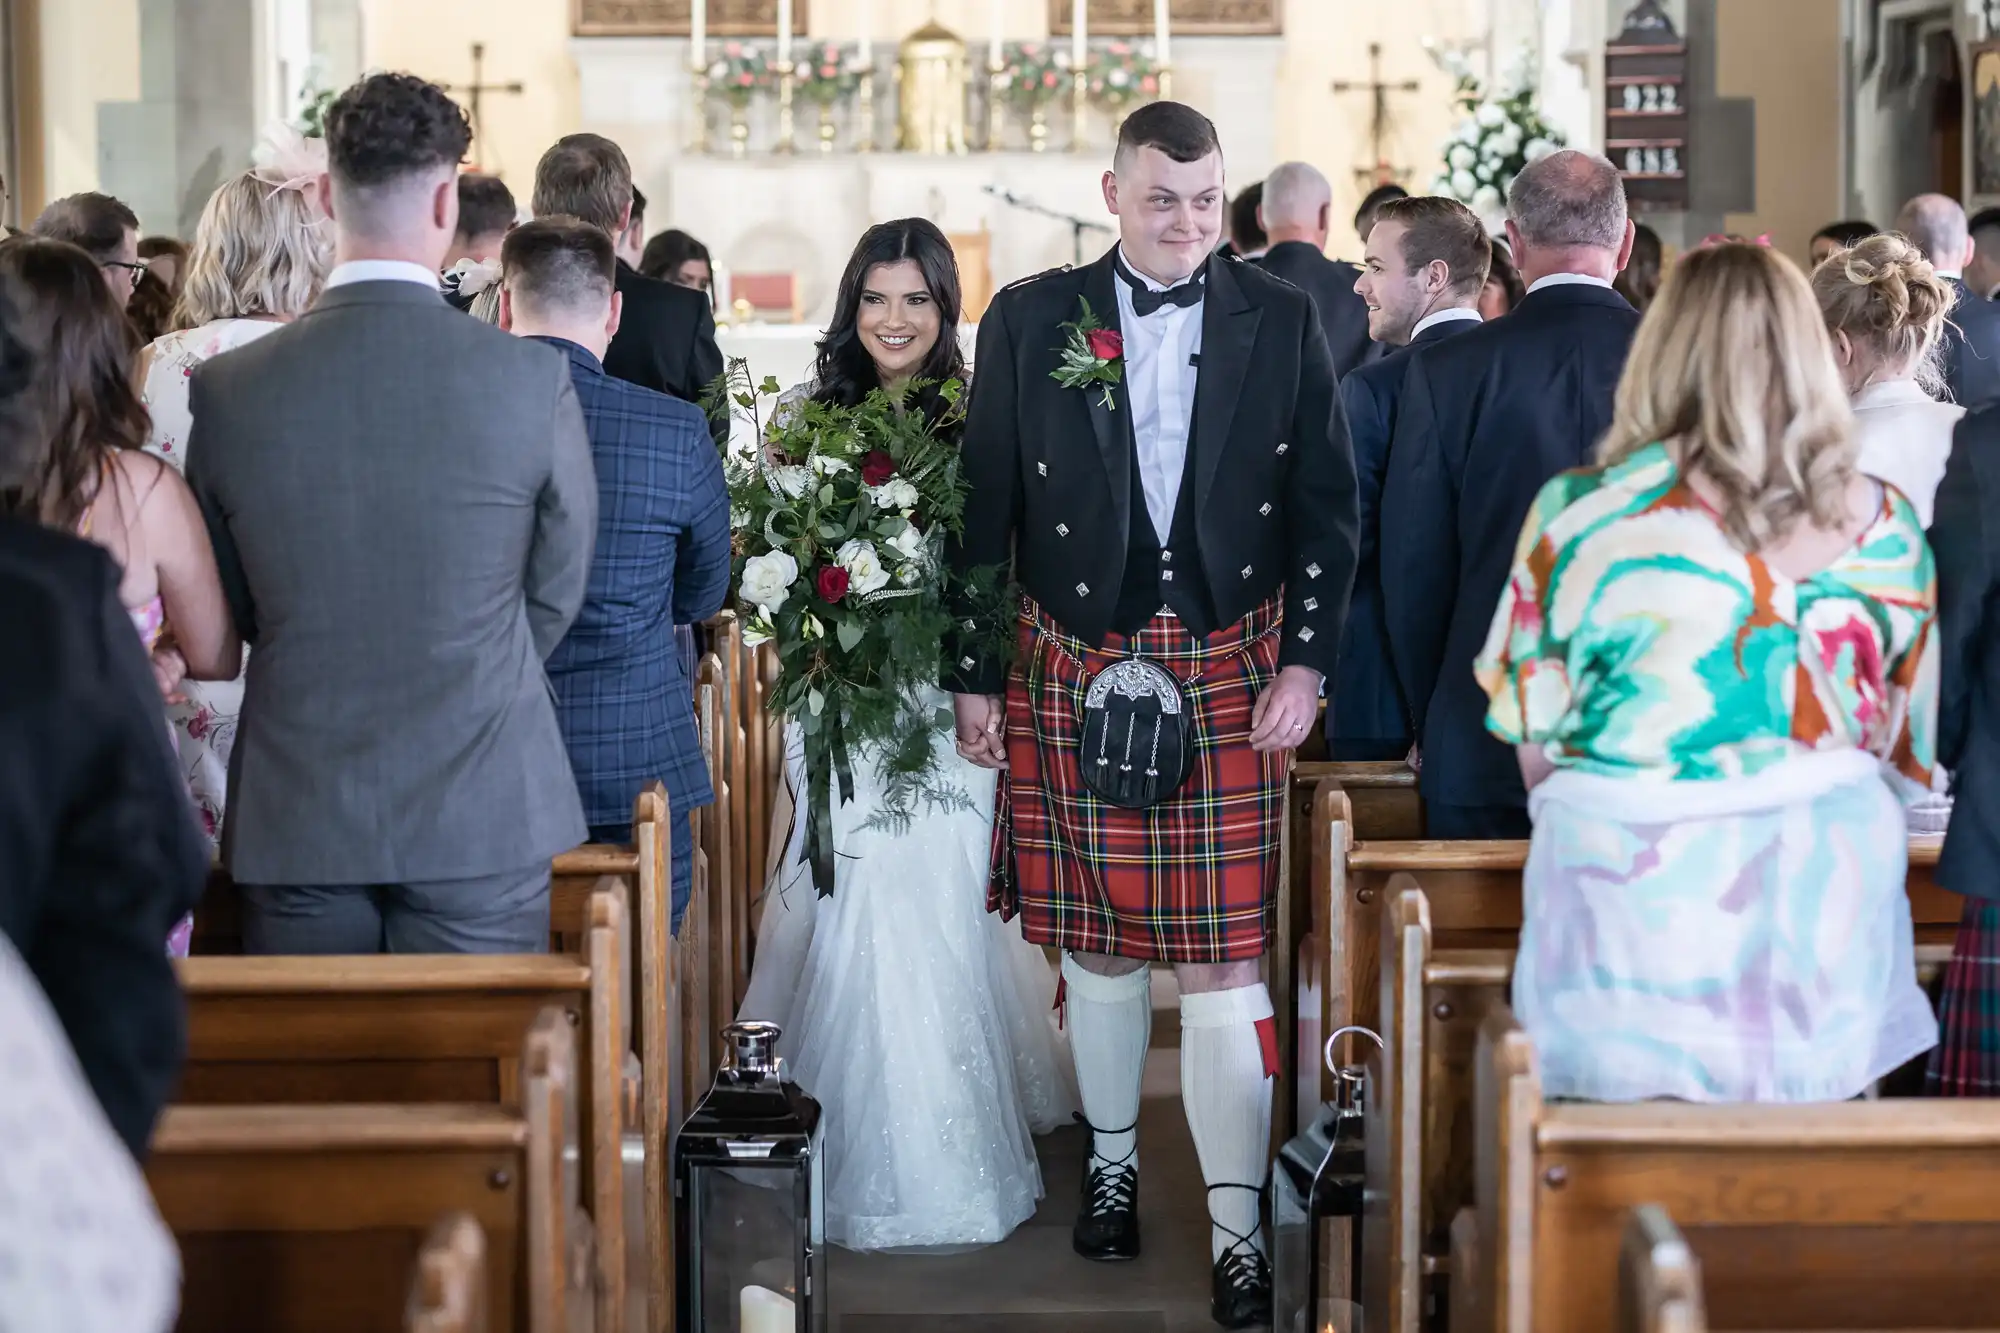 Bride and groom walking down the aisle, the groom in a kilt, surrounded by guests in a church.